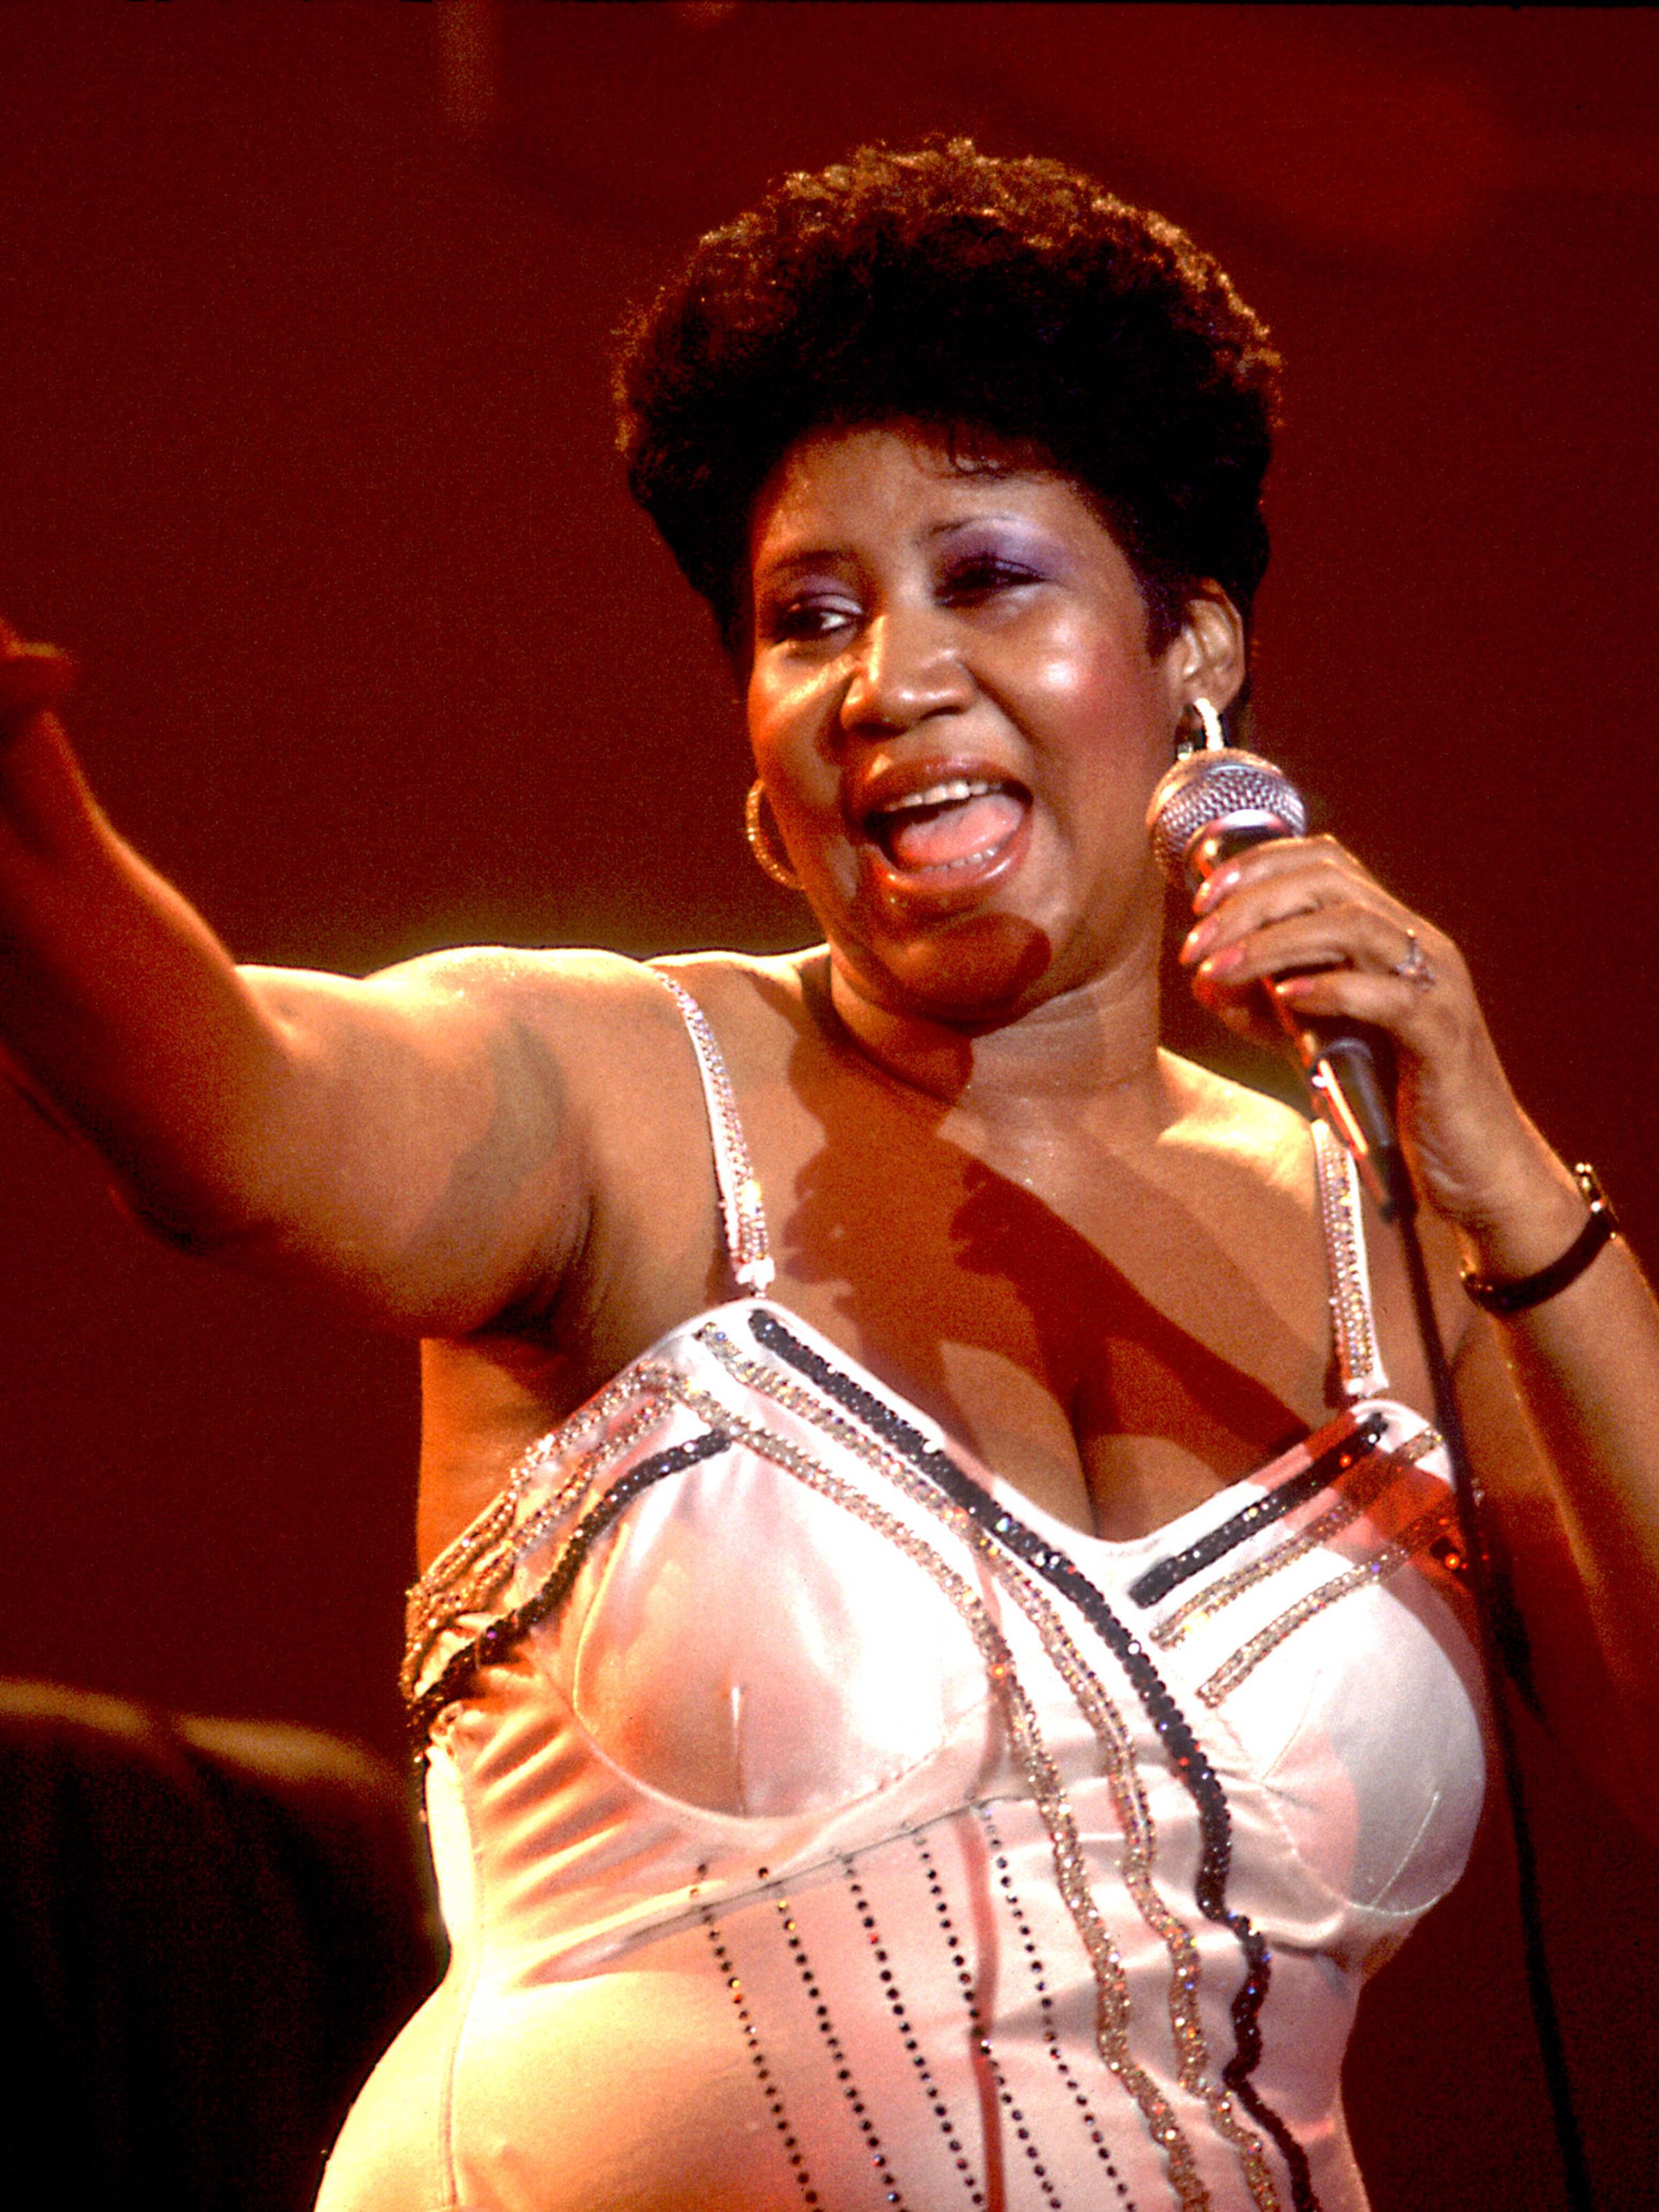 Aretha Franklin's father was a star before she became one | CNN